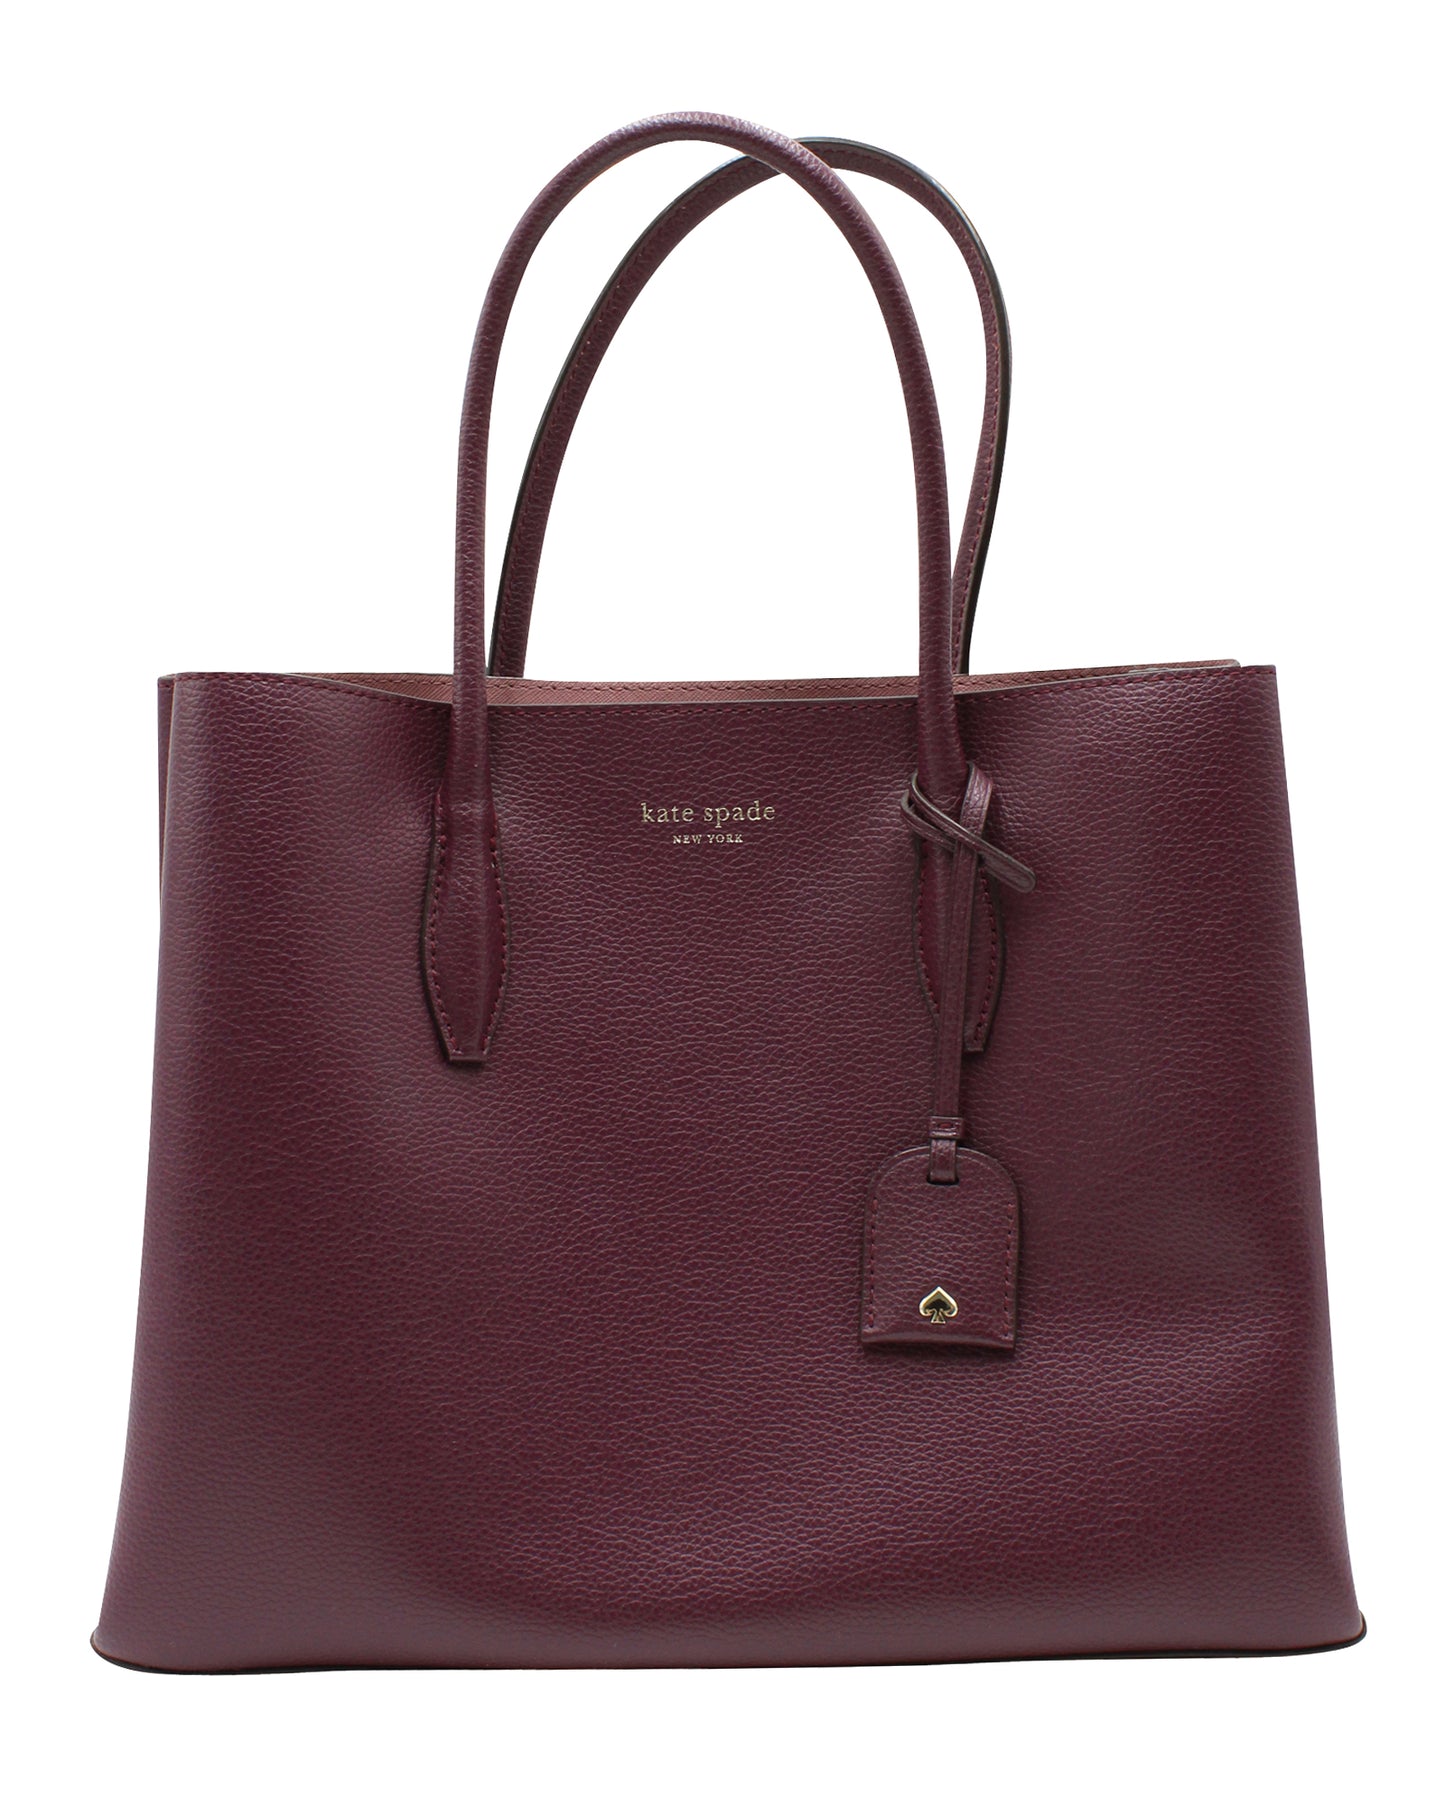 Purple Grained Leather Tote